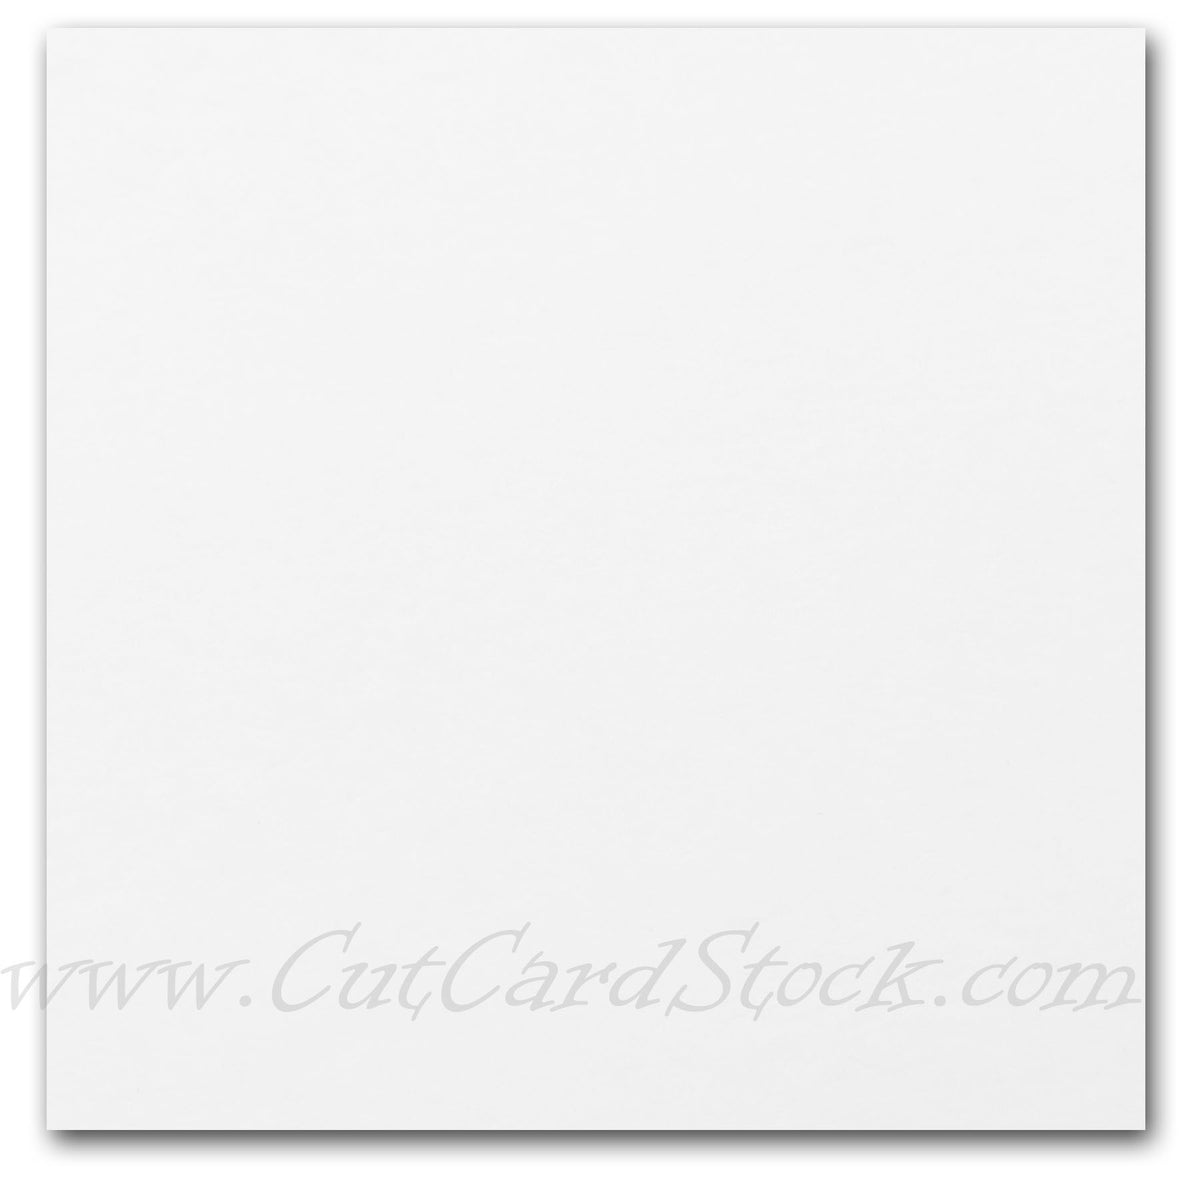 White Discount Card Stock